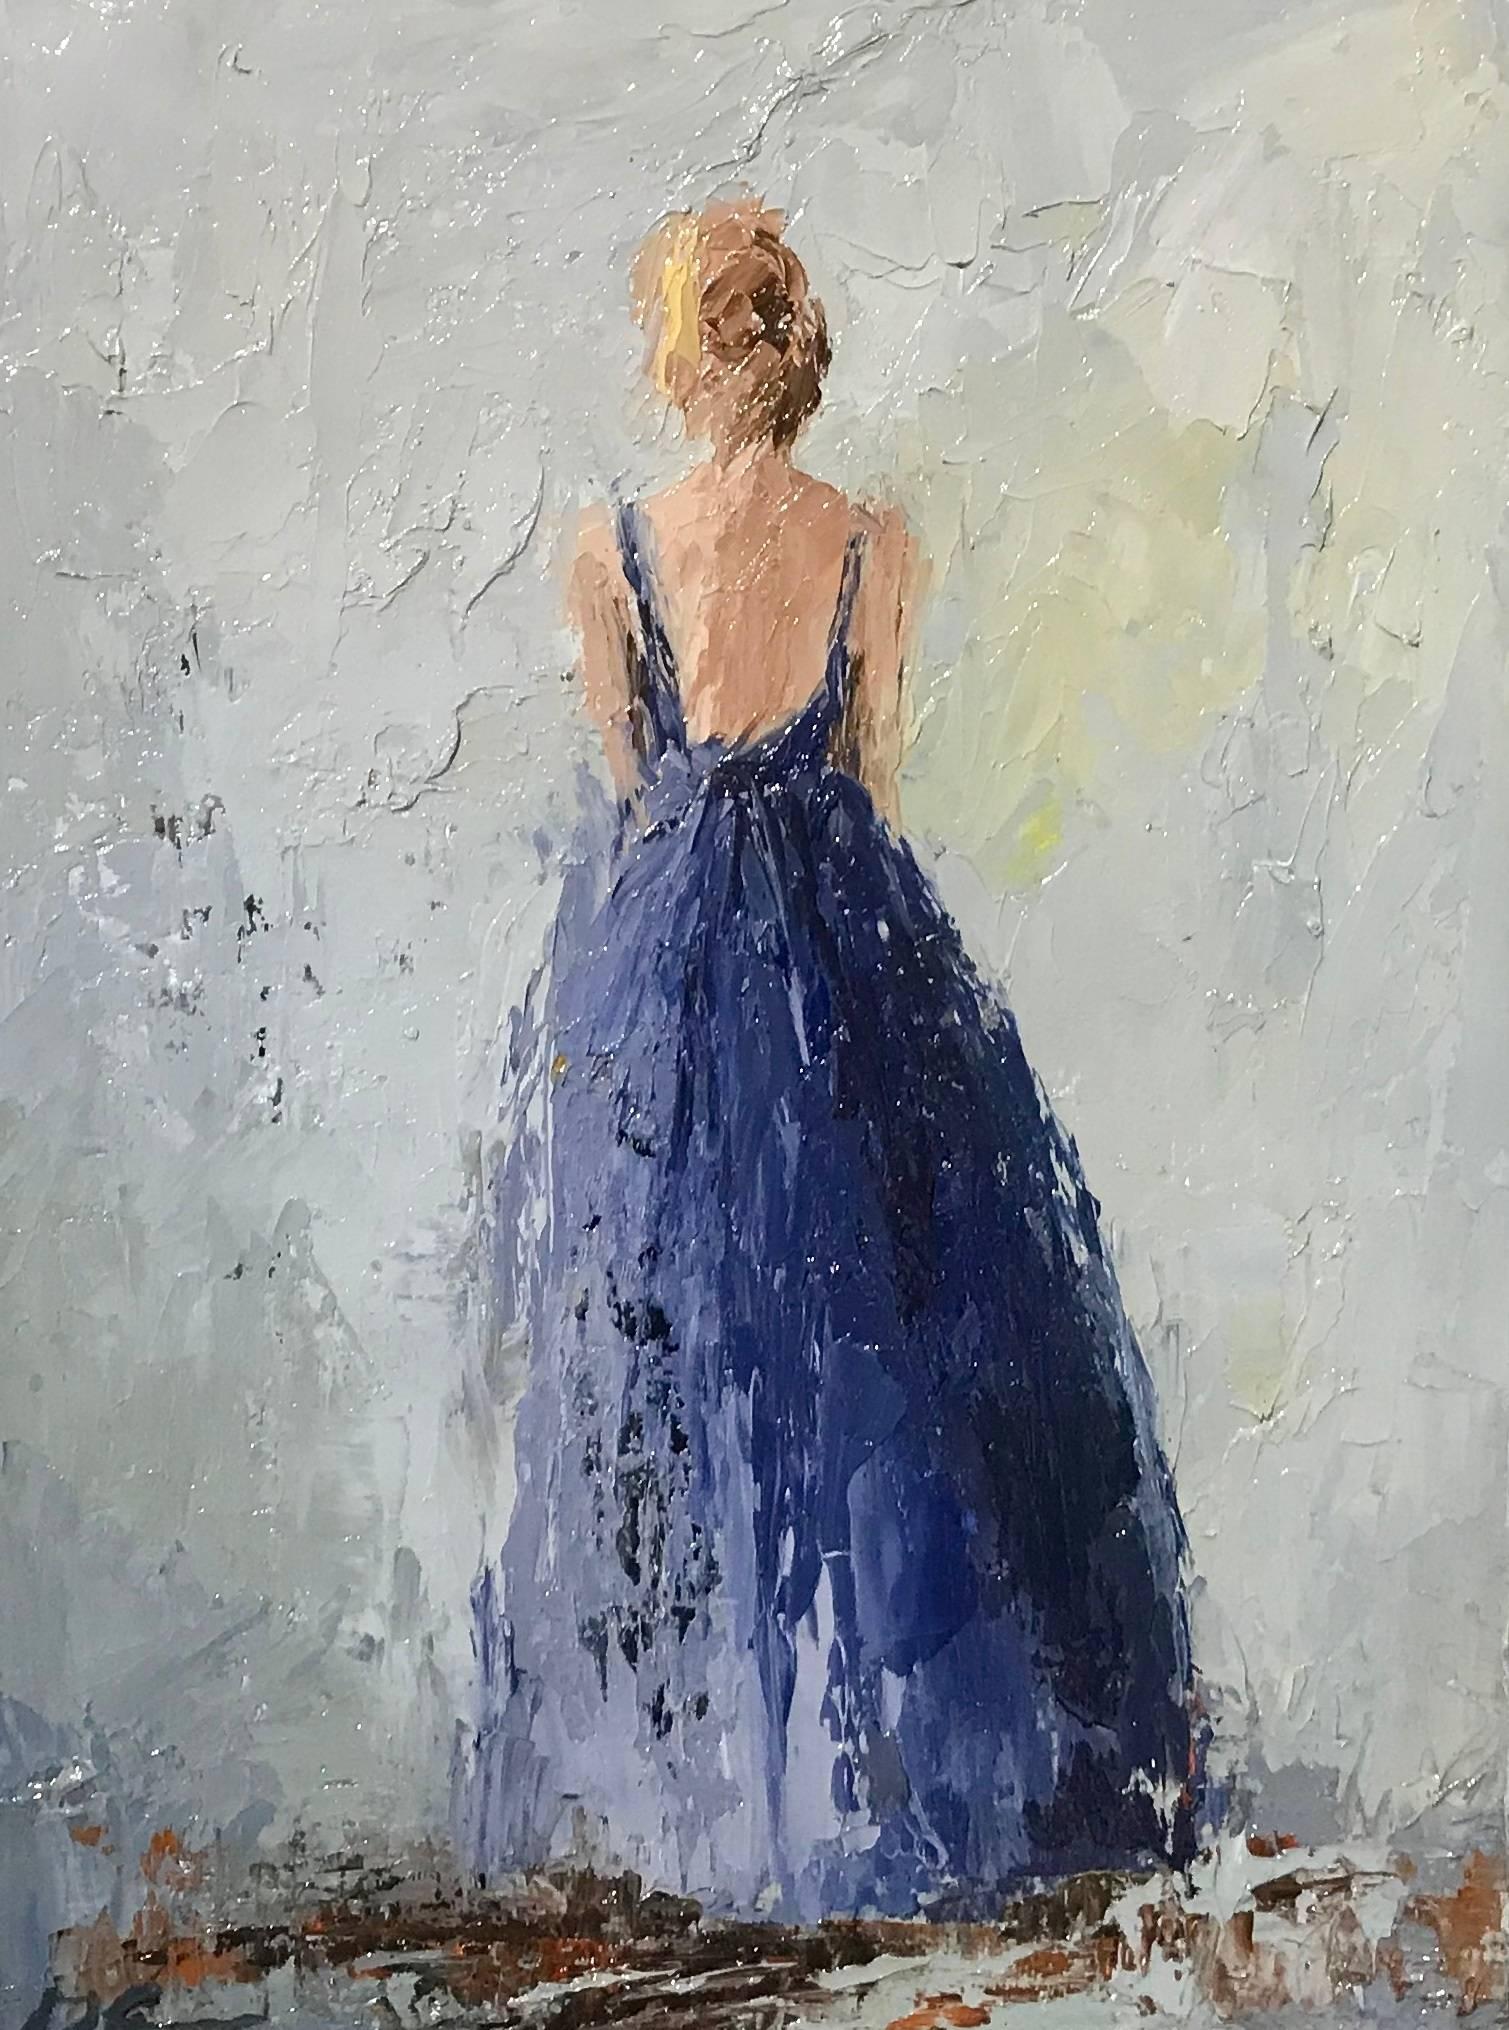 Geri Eubanks Figurative Painting - 'Marion', Petite American Impressionist Painting Depicting a Lady in a Blue Gown